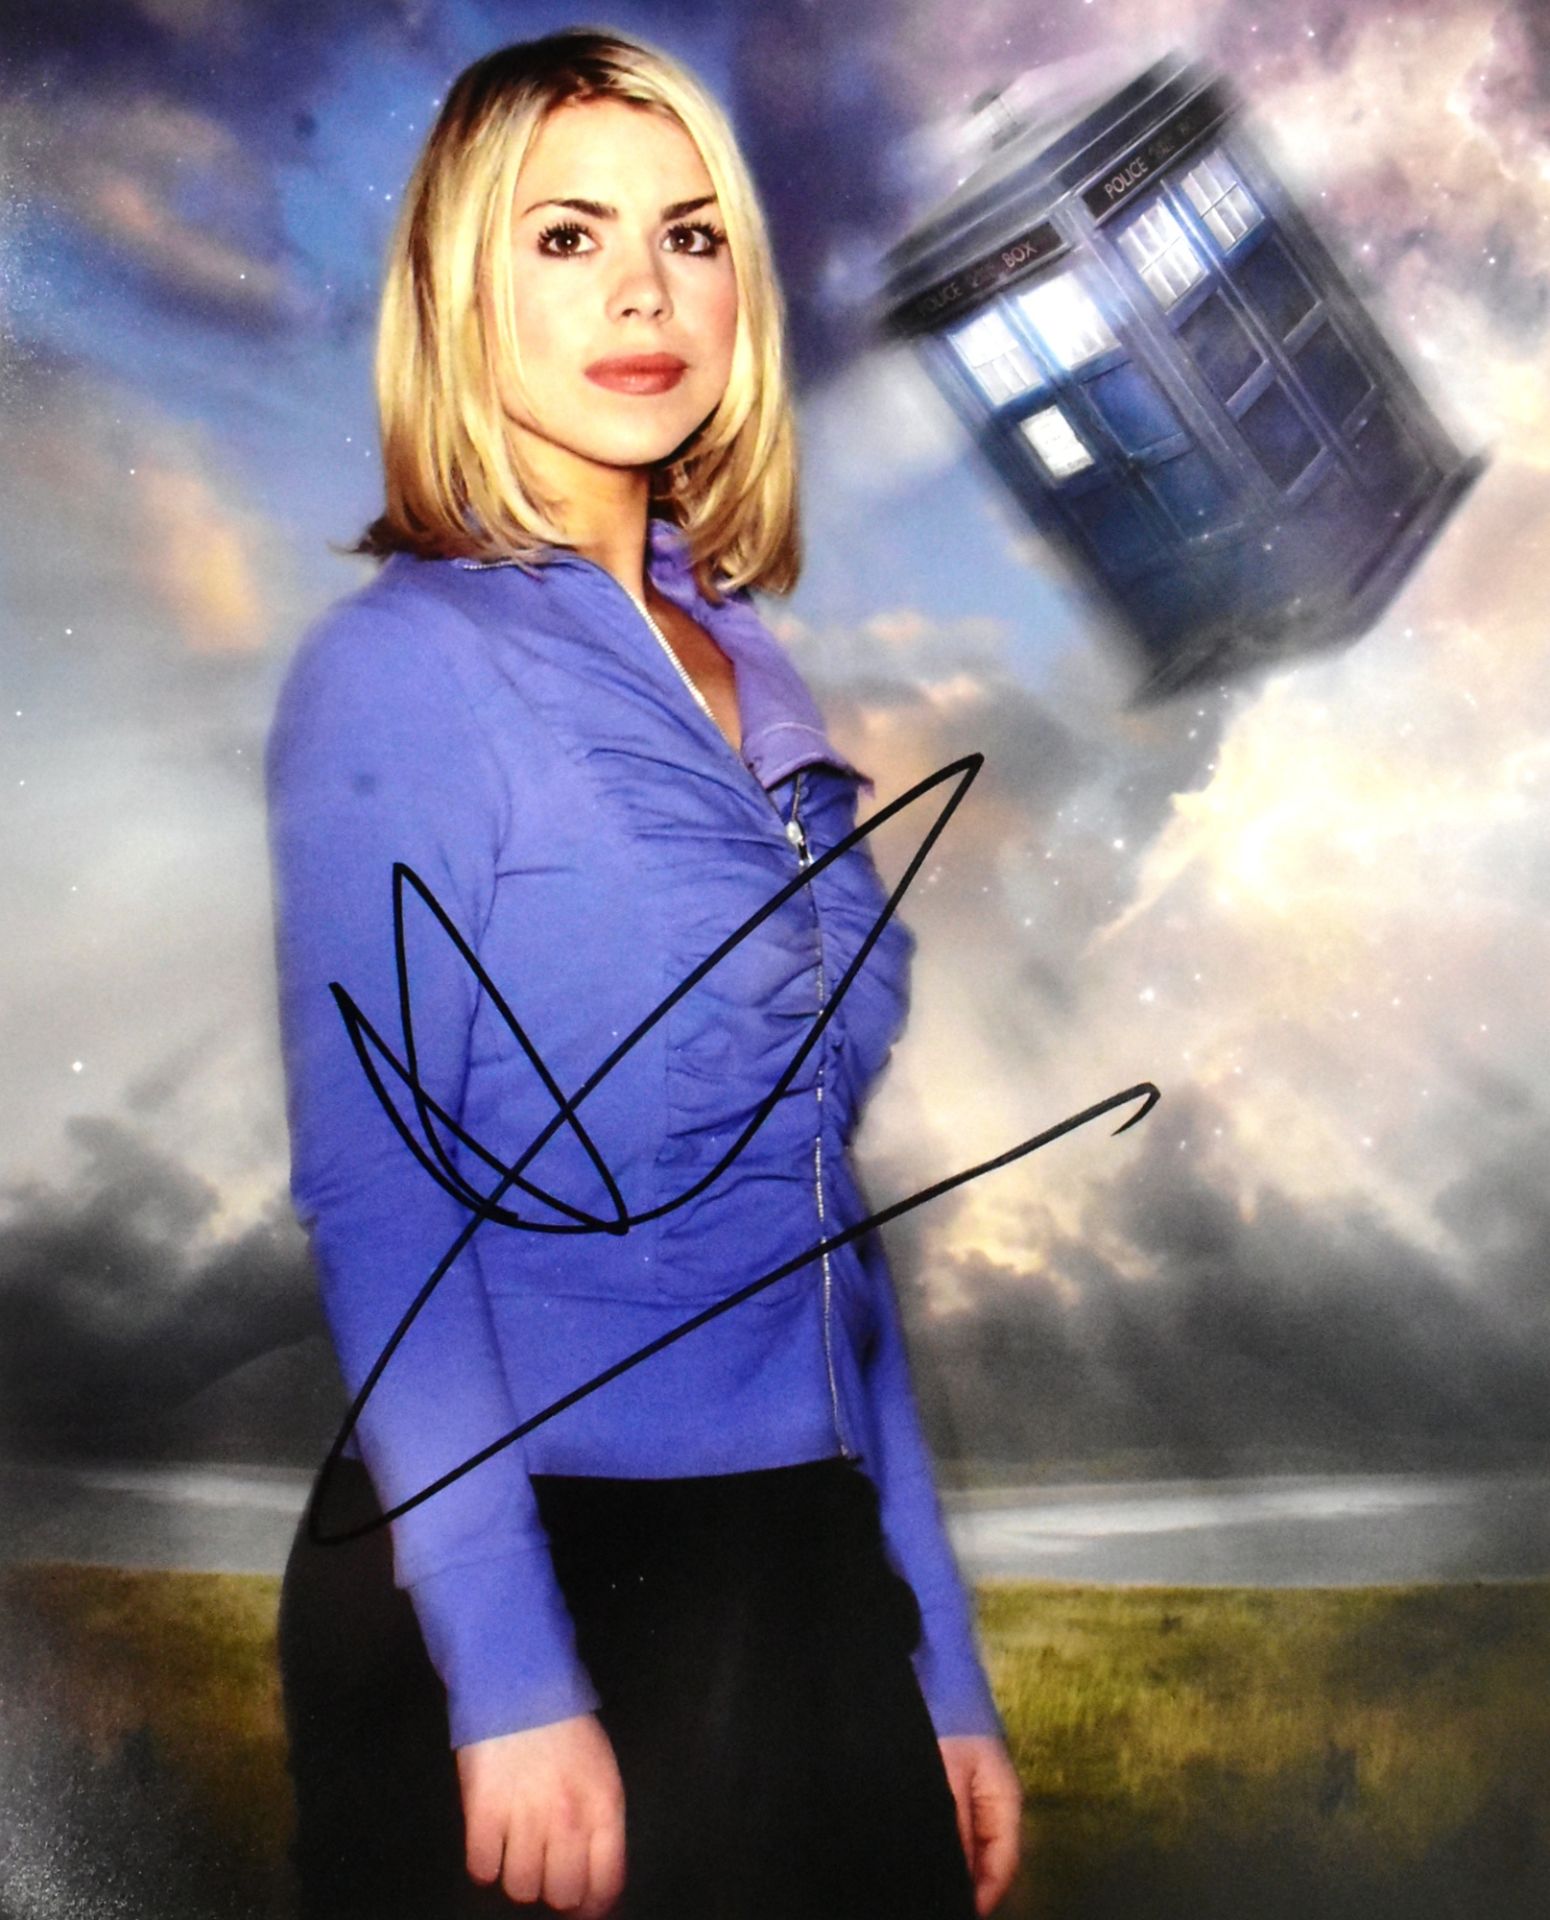 BILLIE PIPER - DOCTOR WHO - SIGNED 8X10" PHOTO - AFTAL